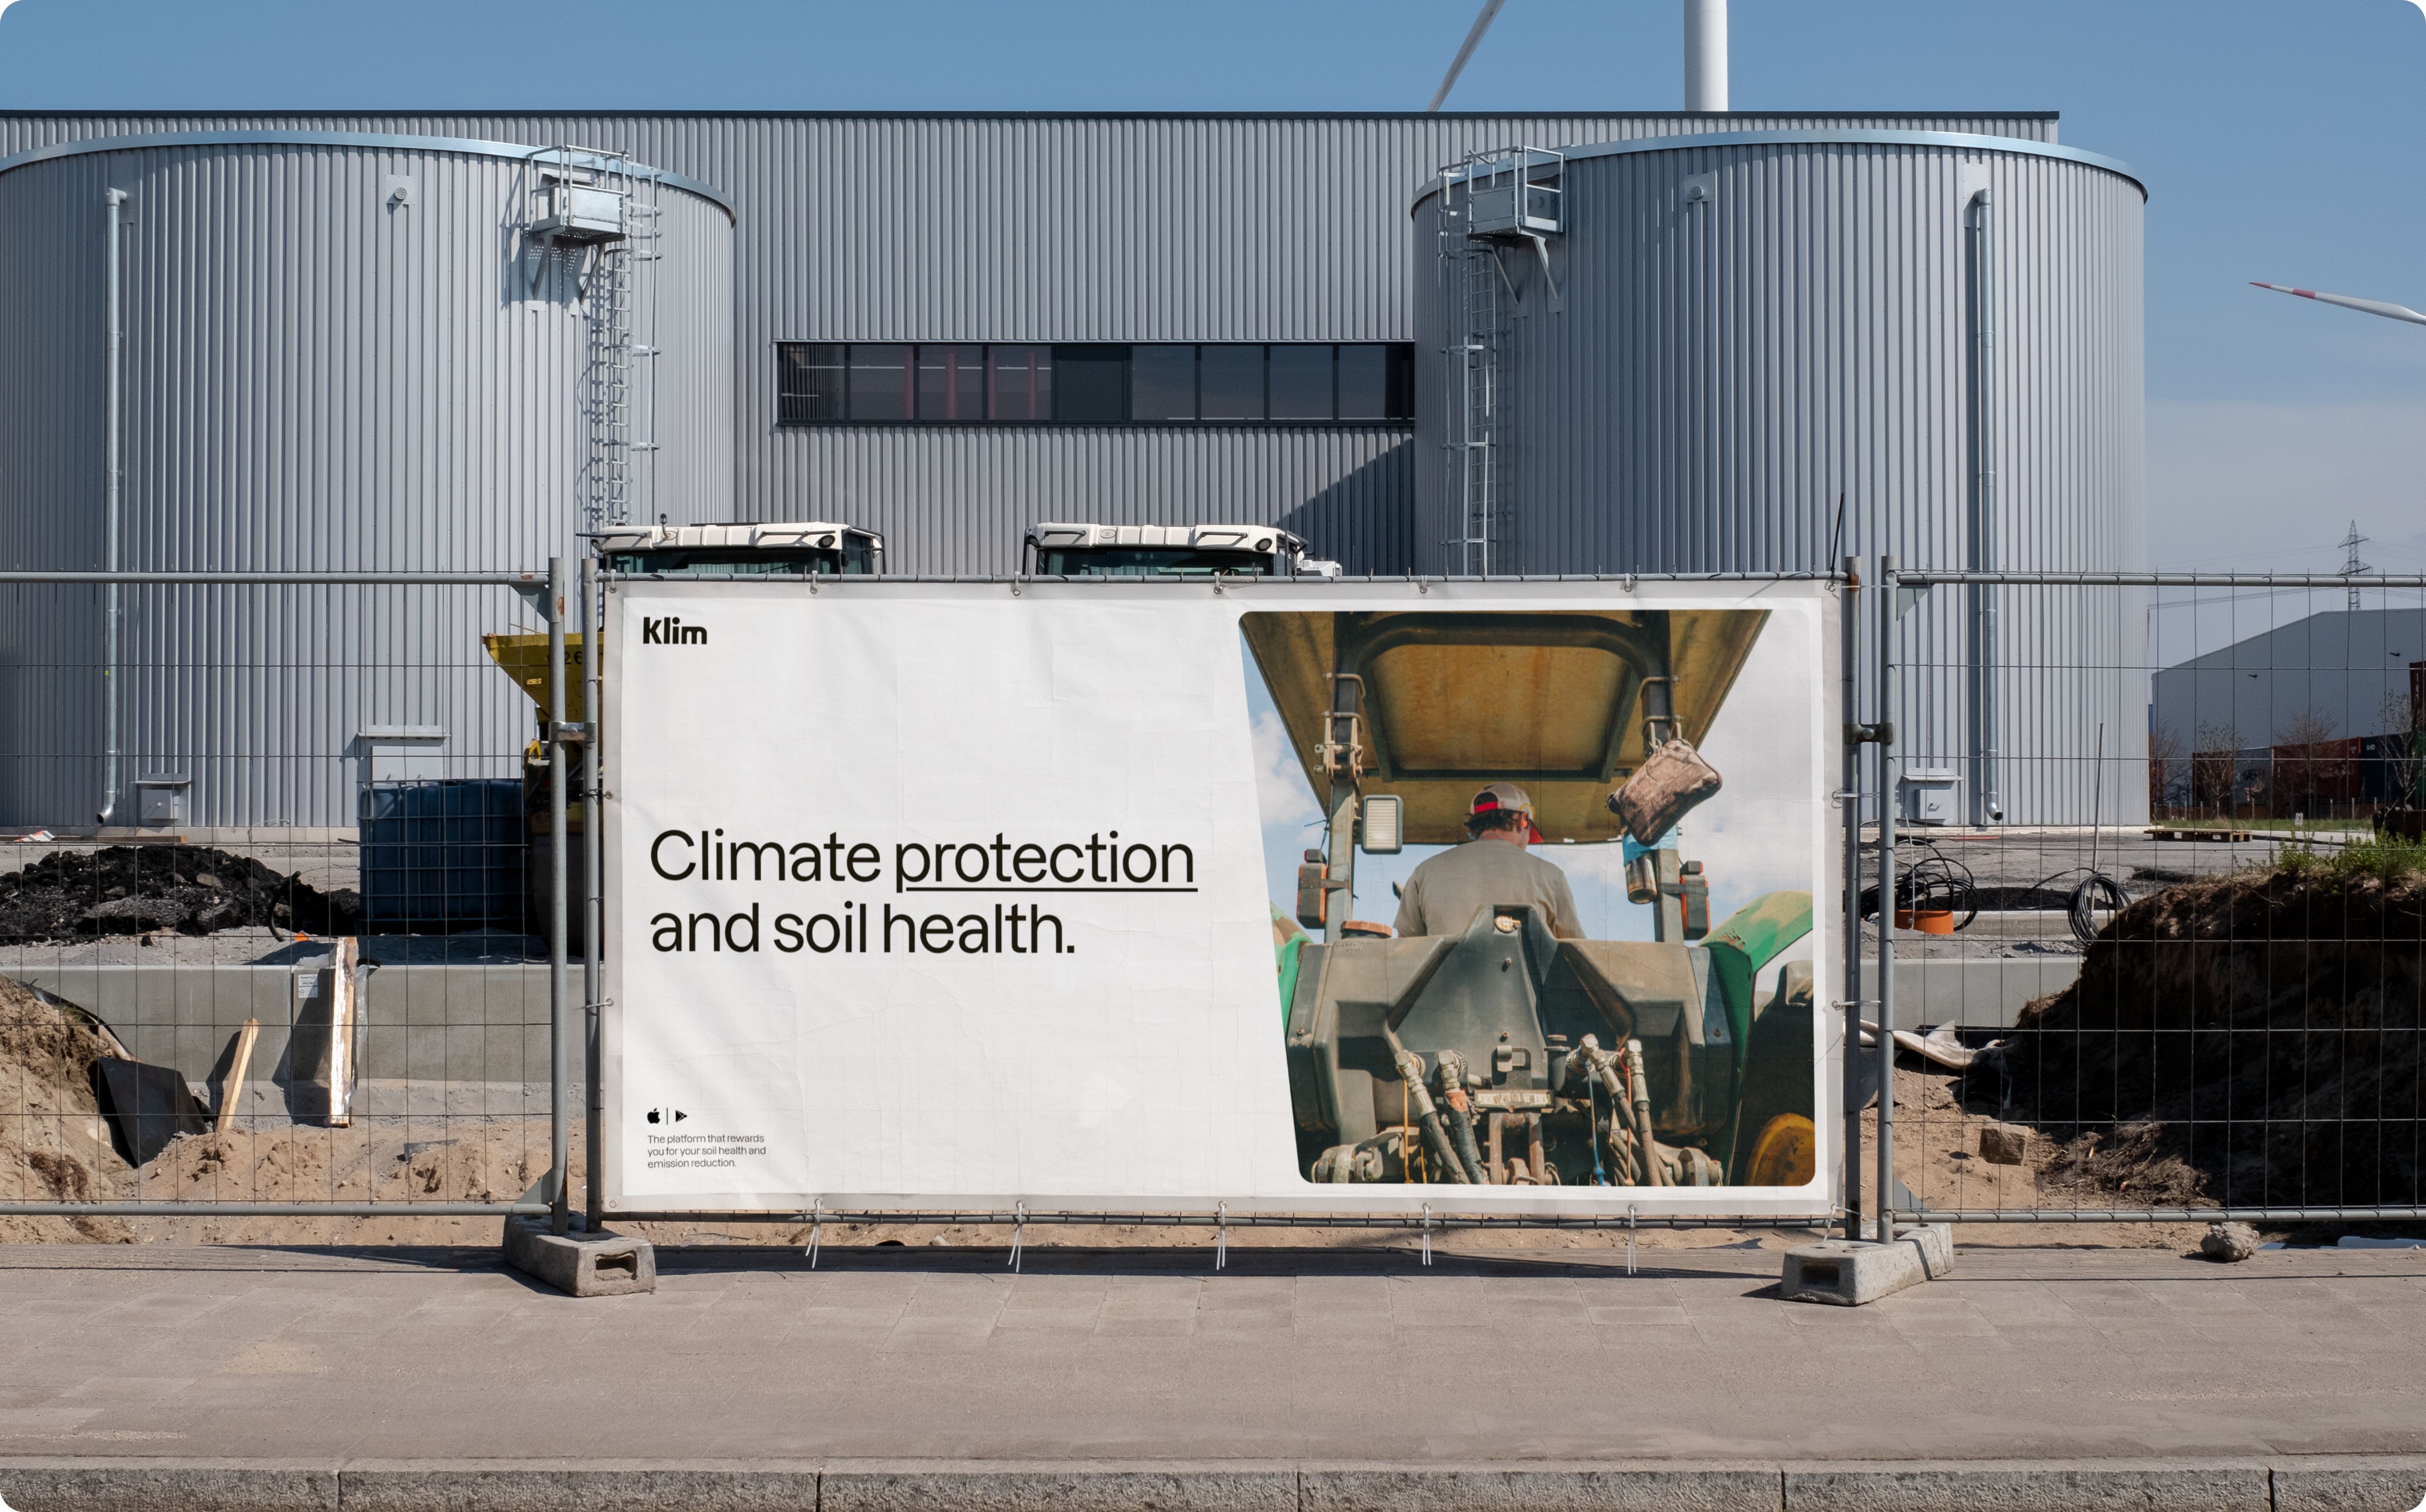 Metal fence hoarding reading 'Climate protection and soil health.'